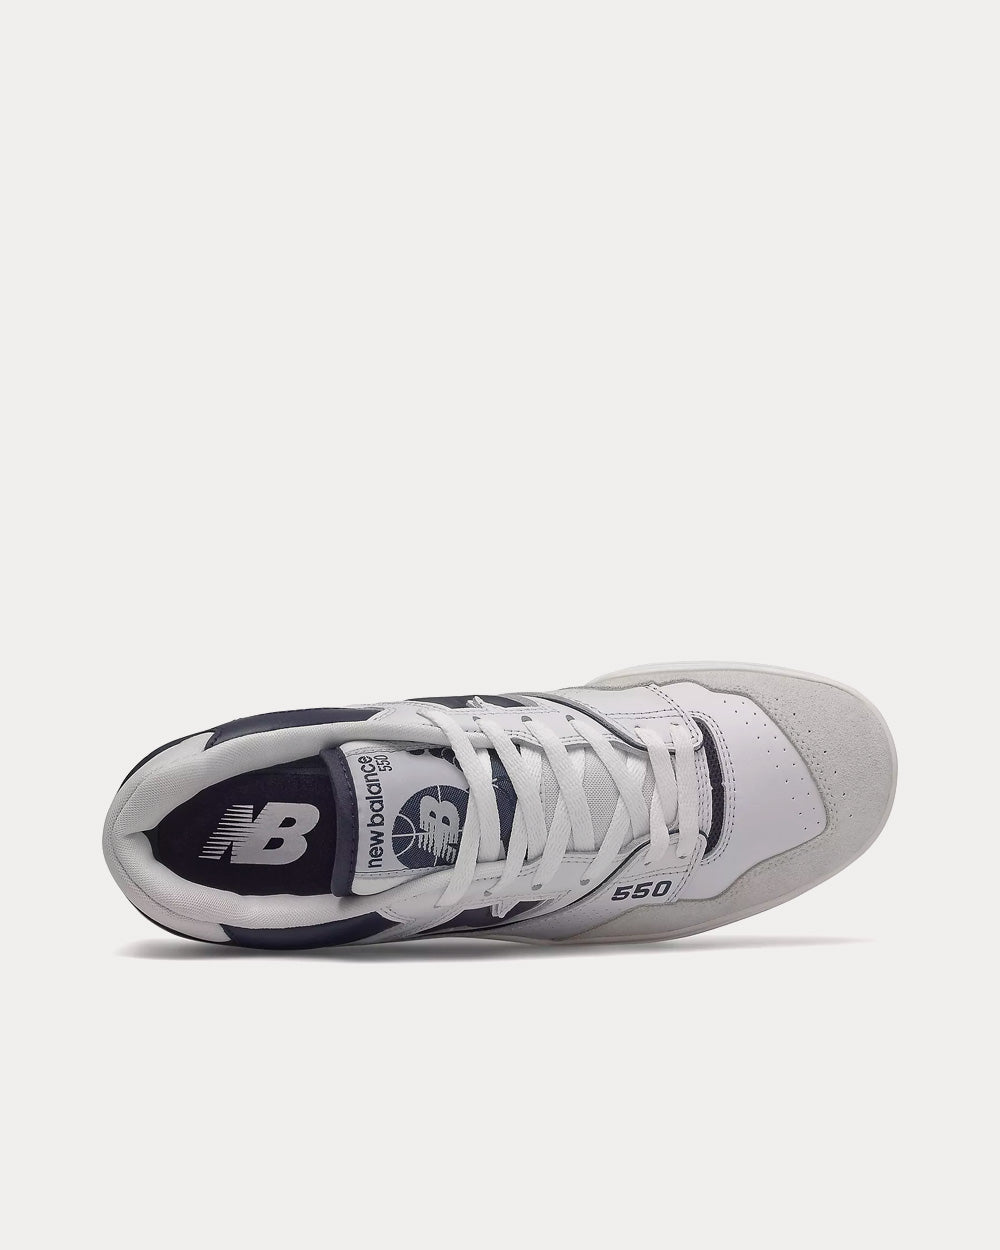 New Balance - 550 White with Team Navy Low Top Sneakers